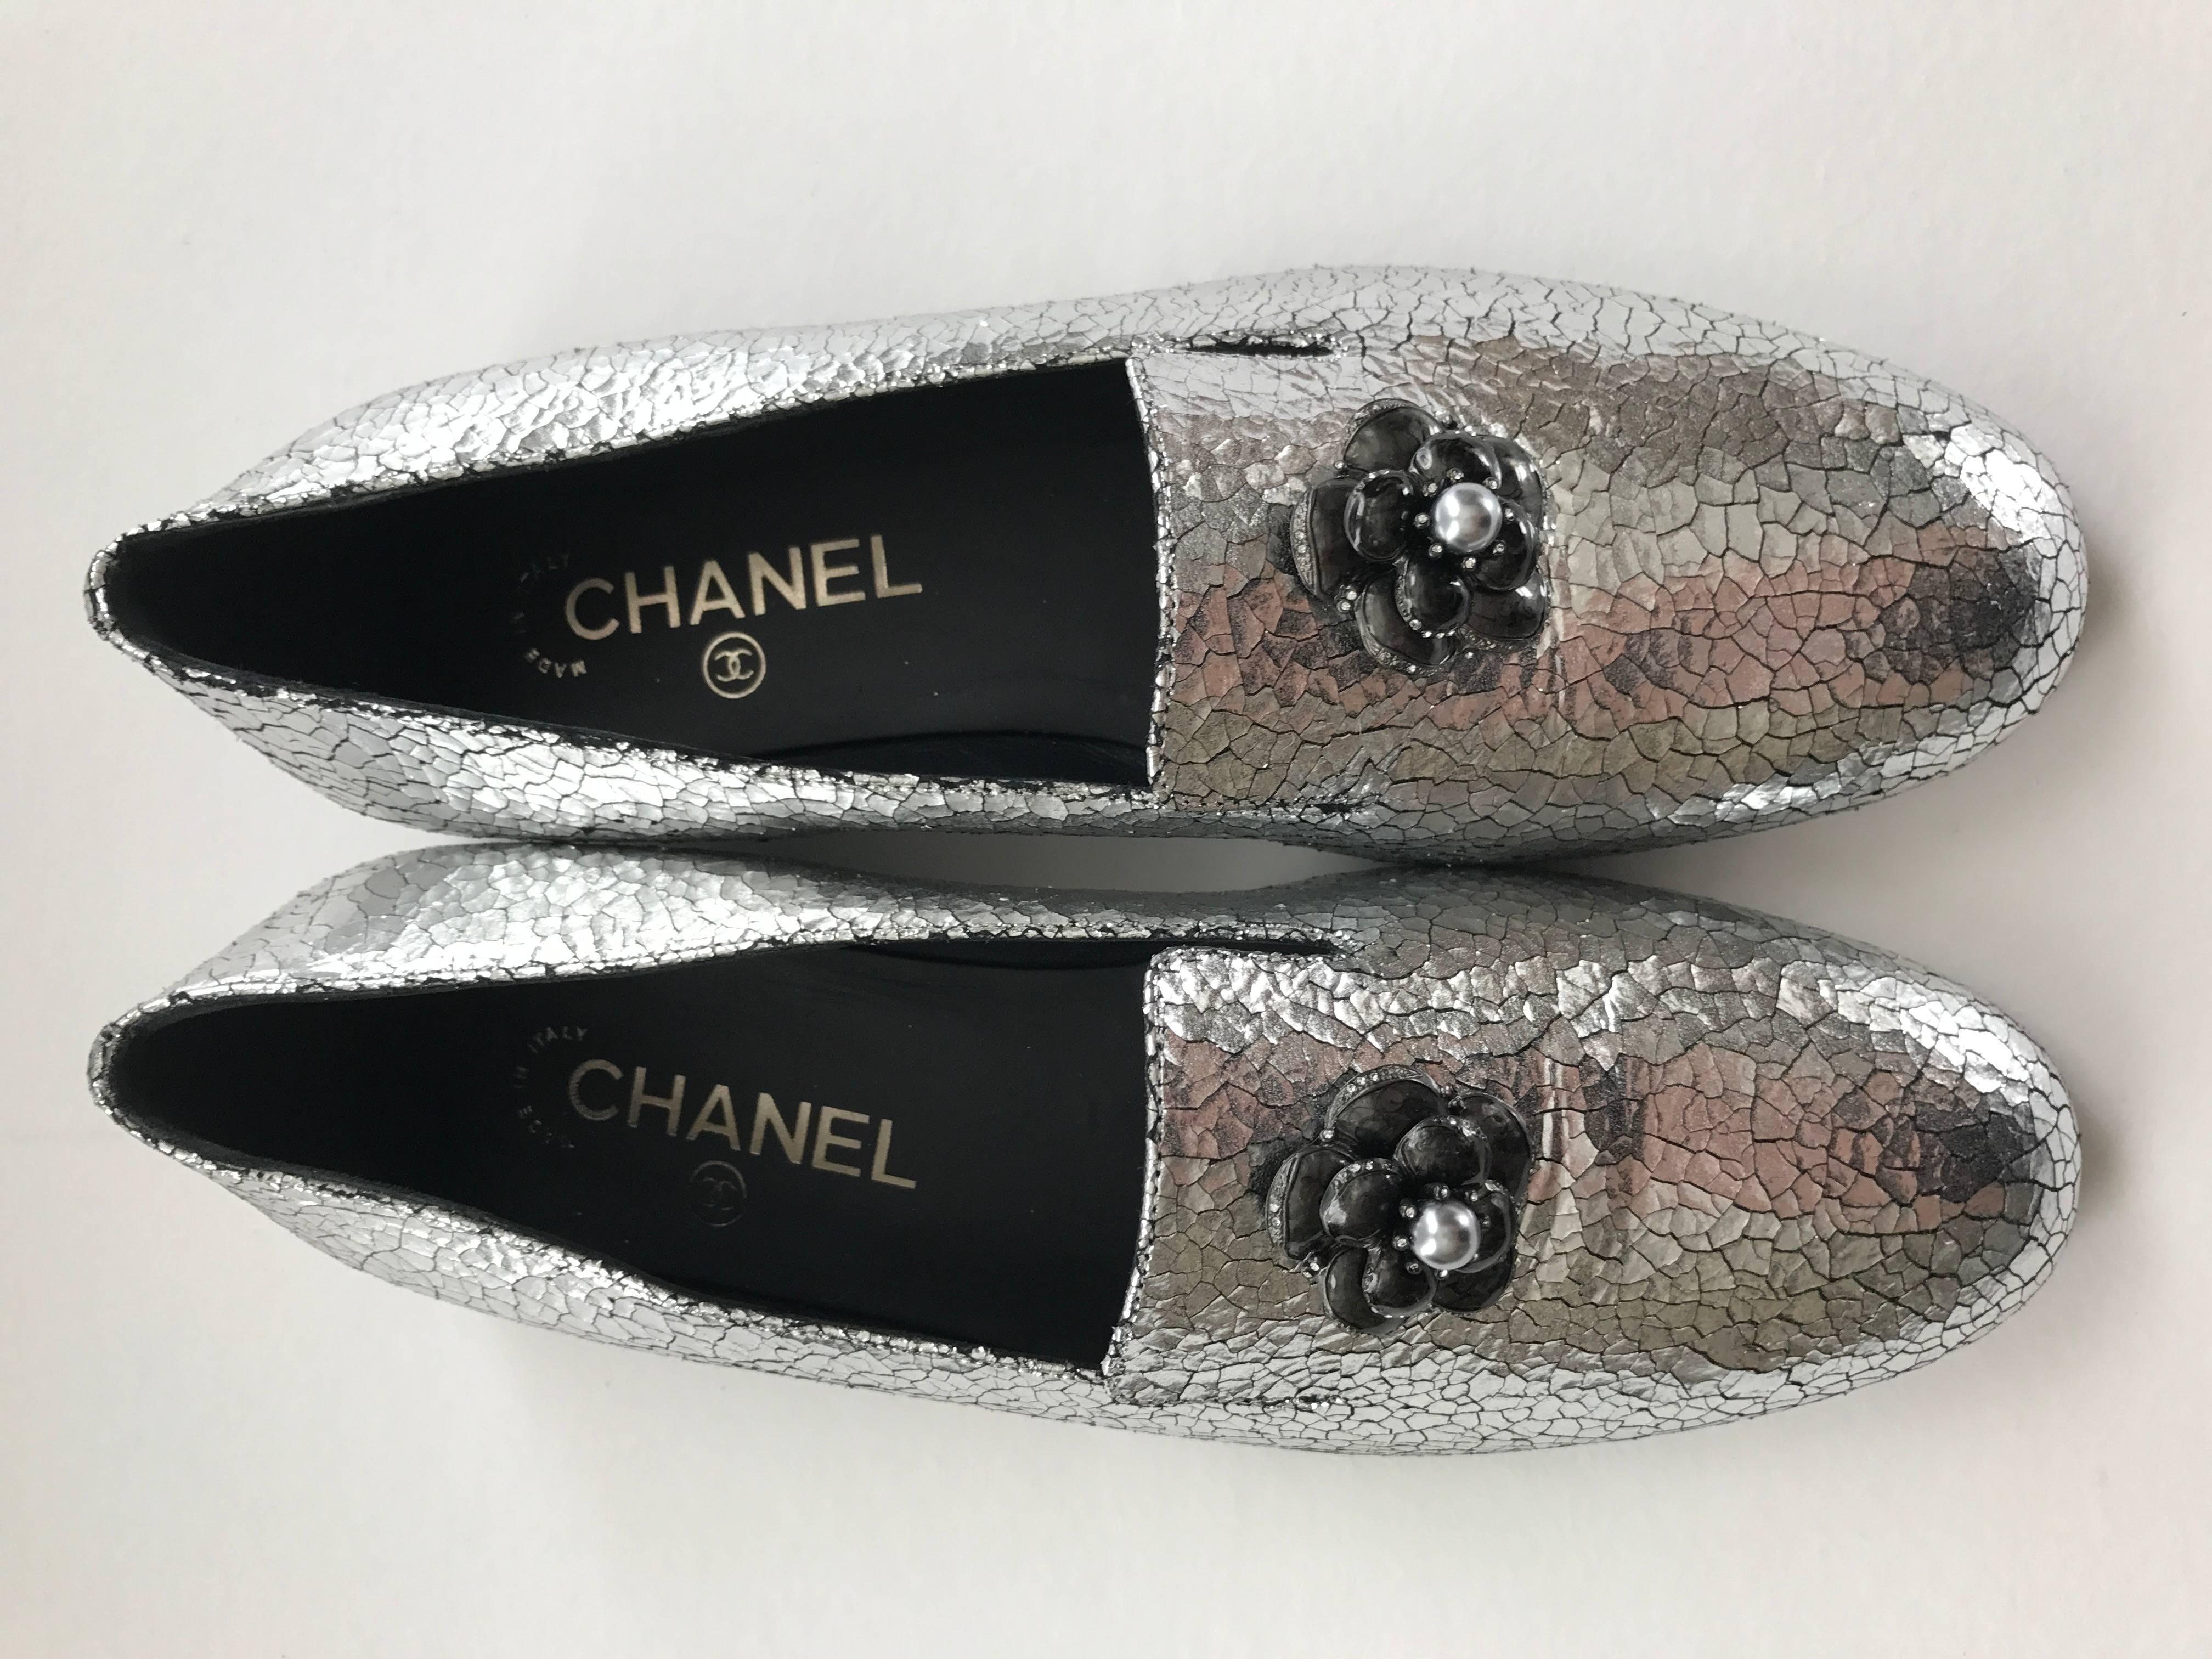 Eye-catching Chanel silver loafers in crackled leather with Gripoix pewter camellia embellishment. The flower has 
tiny rhinestone edging and a grey silver pearl in center. The marked size is 37 1/2 or US 7 1/2.